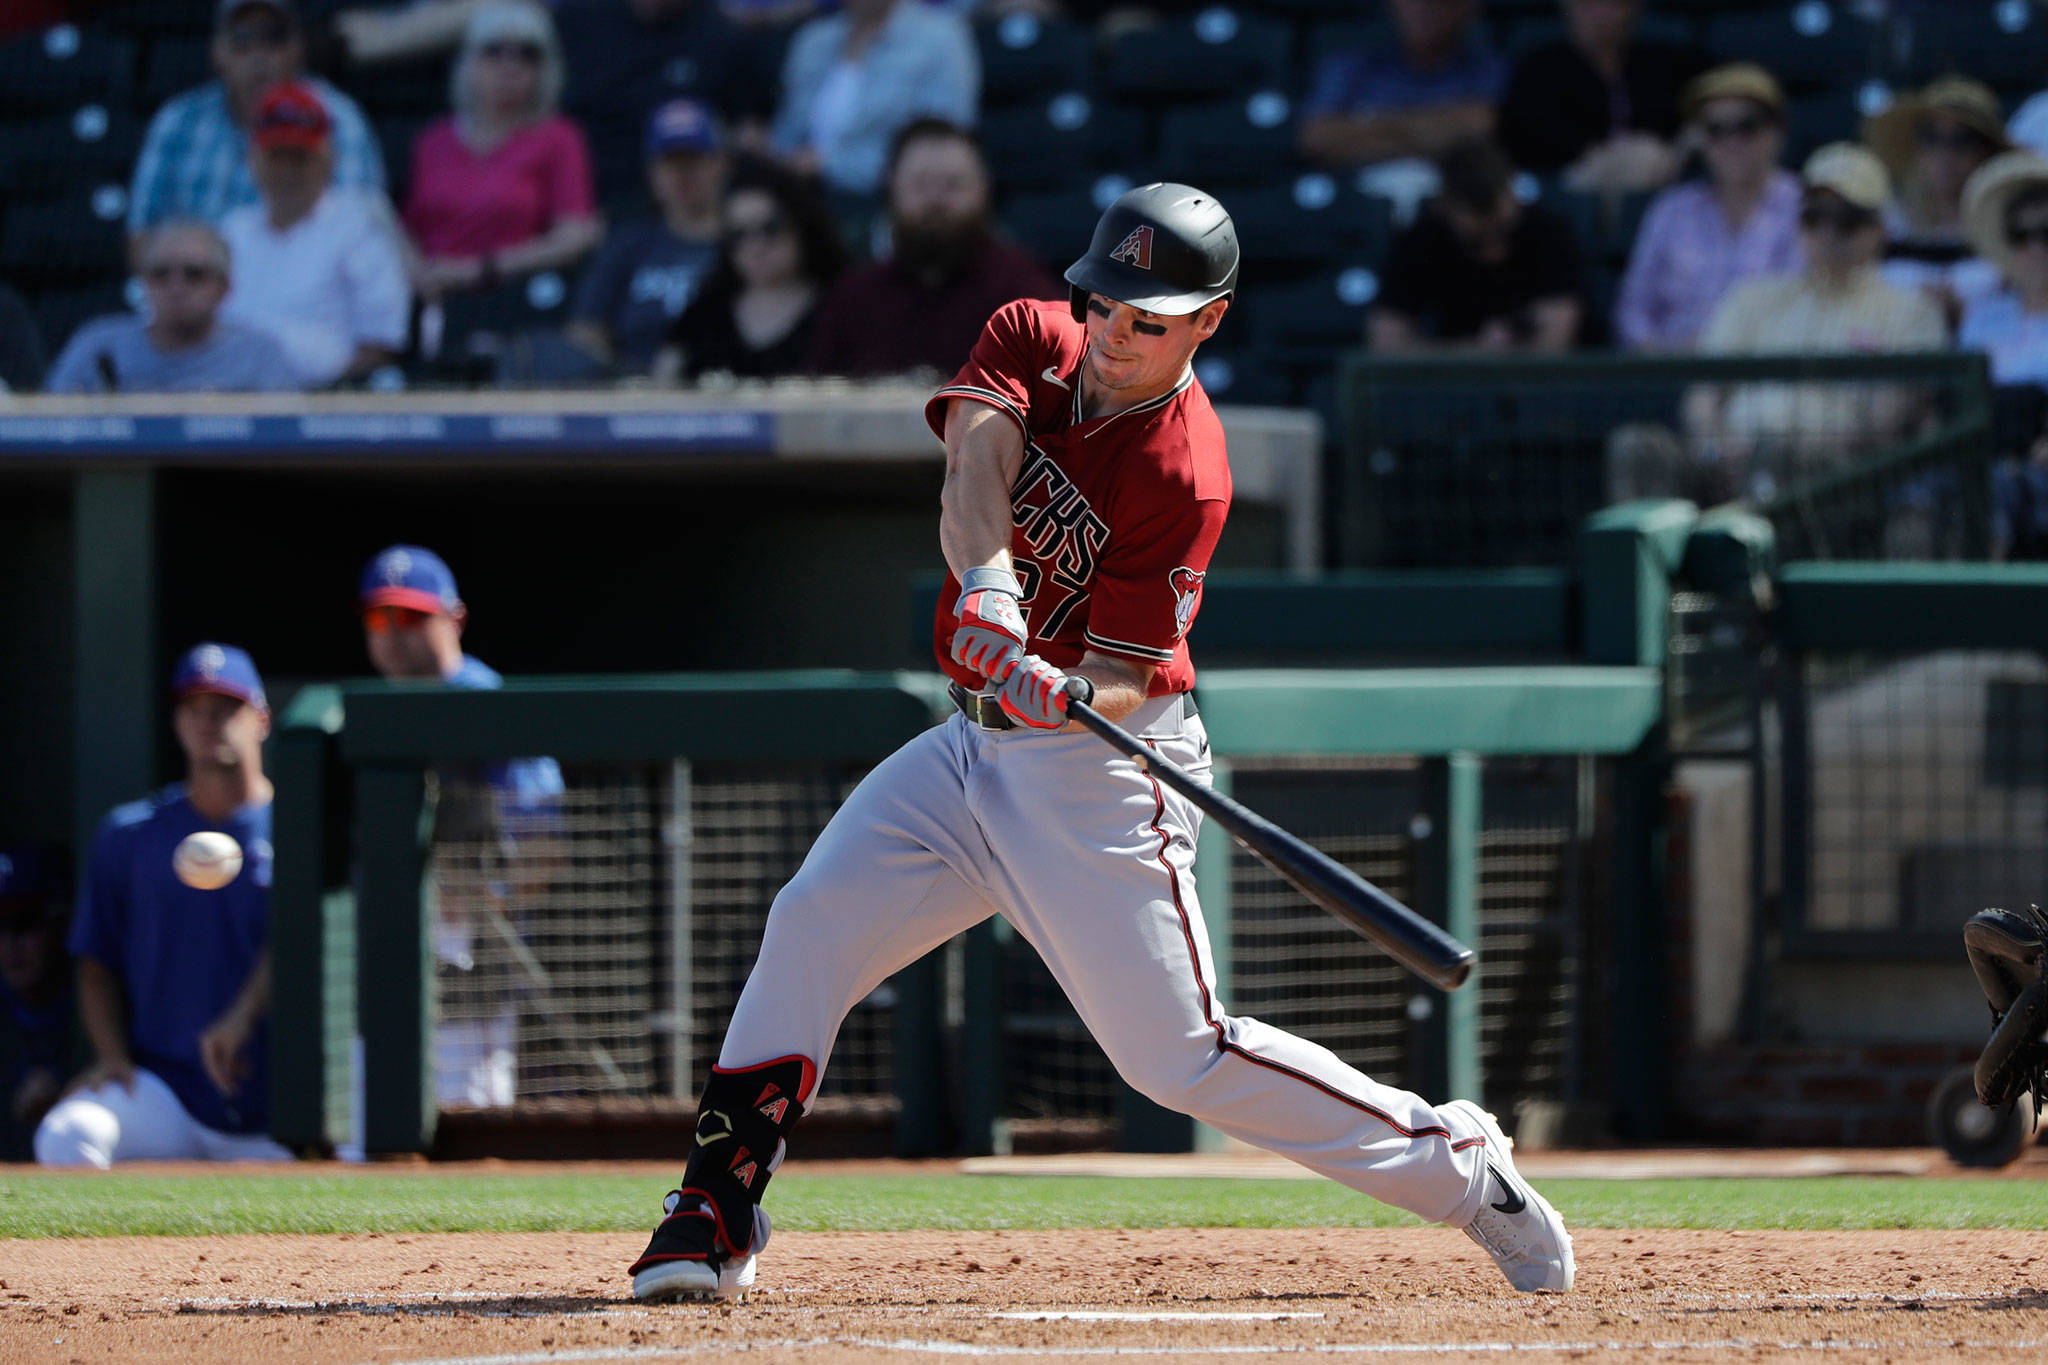 Former Jackson High School star Travis Snider singles during a spring training game with the Diamondbacks on March 5, 2020, in Surprise, Ariz. (AP Photo/Elaine Thompson)